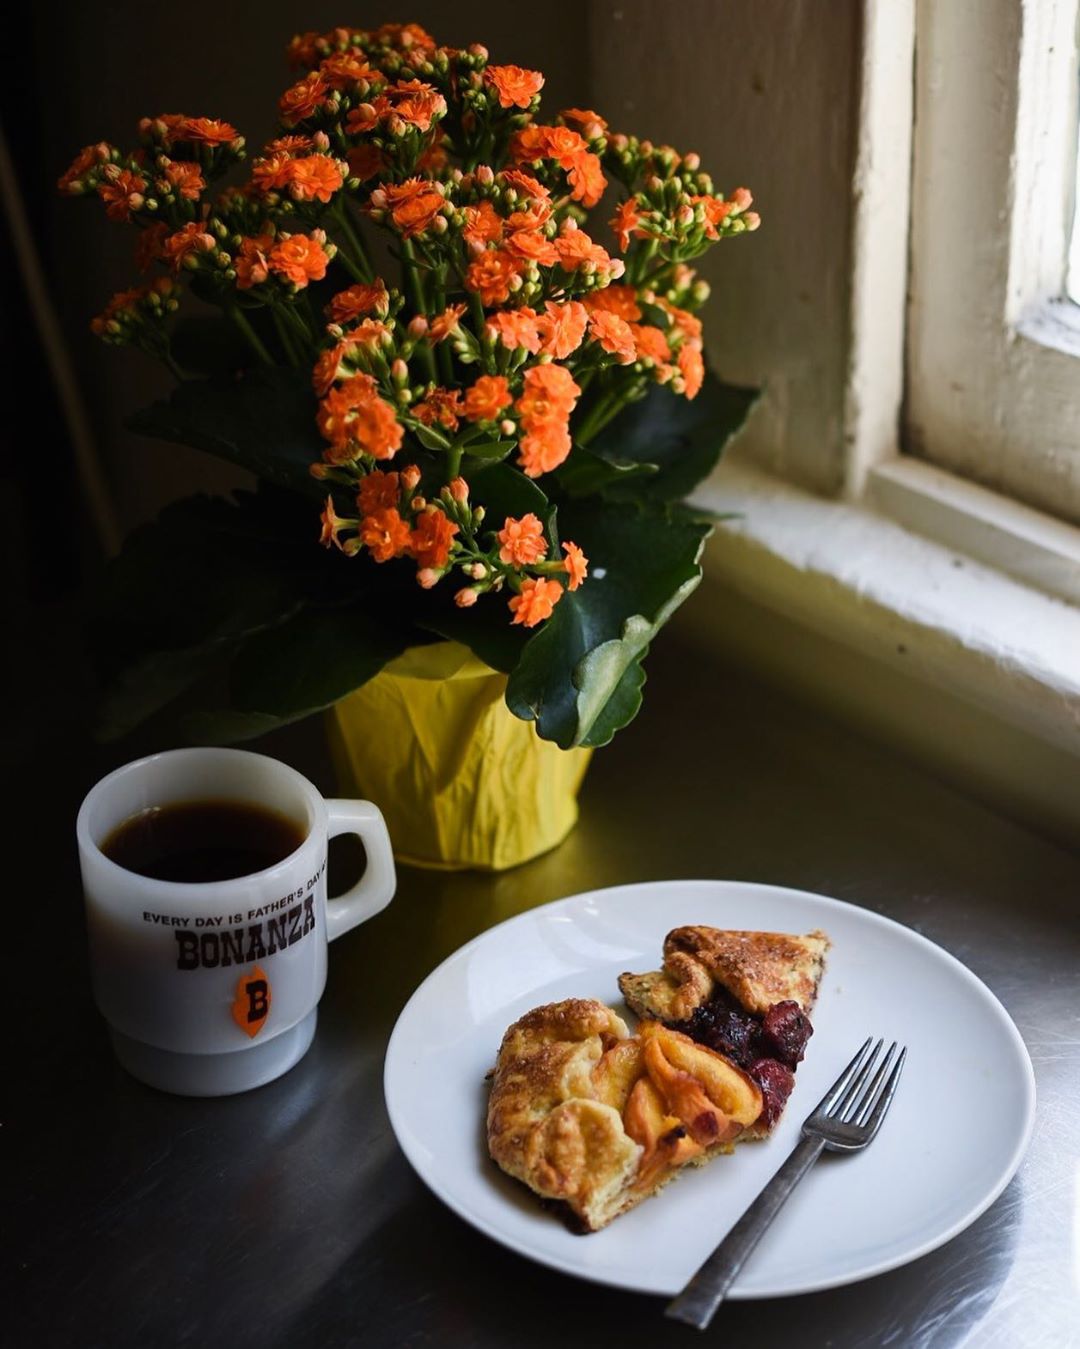 I live here, in this real-life Pinterest board filled with found coffee mugs and breakfast pie. Truly, truly blessed.